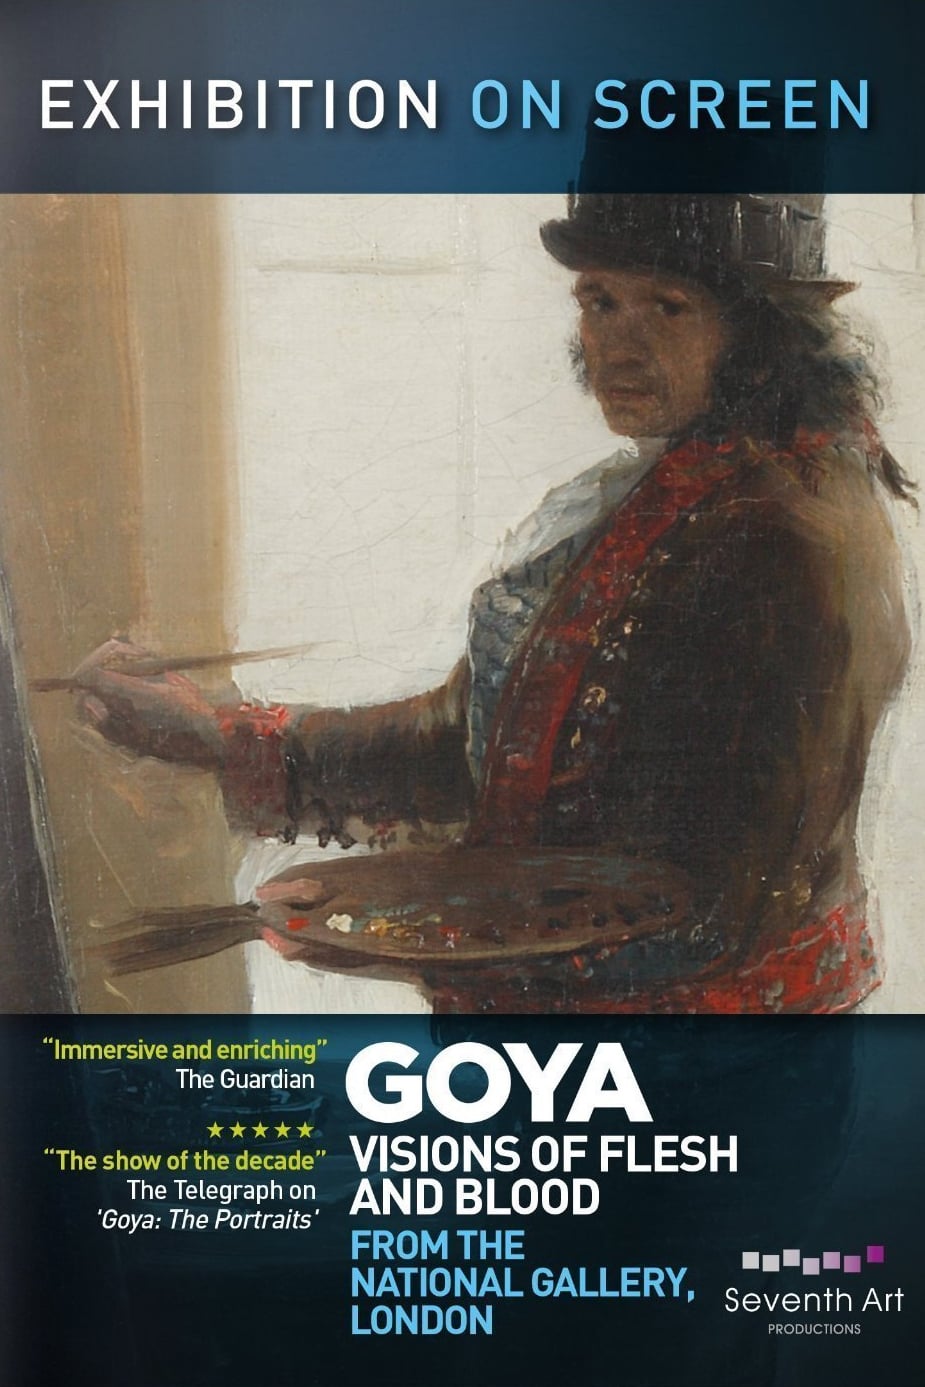 GOYA: VISIONS OF FLESH AND BLOOD